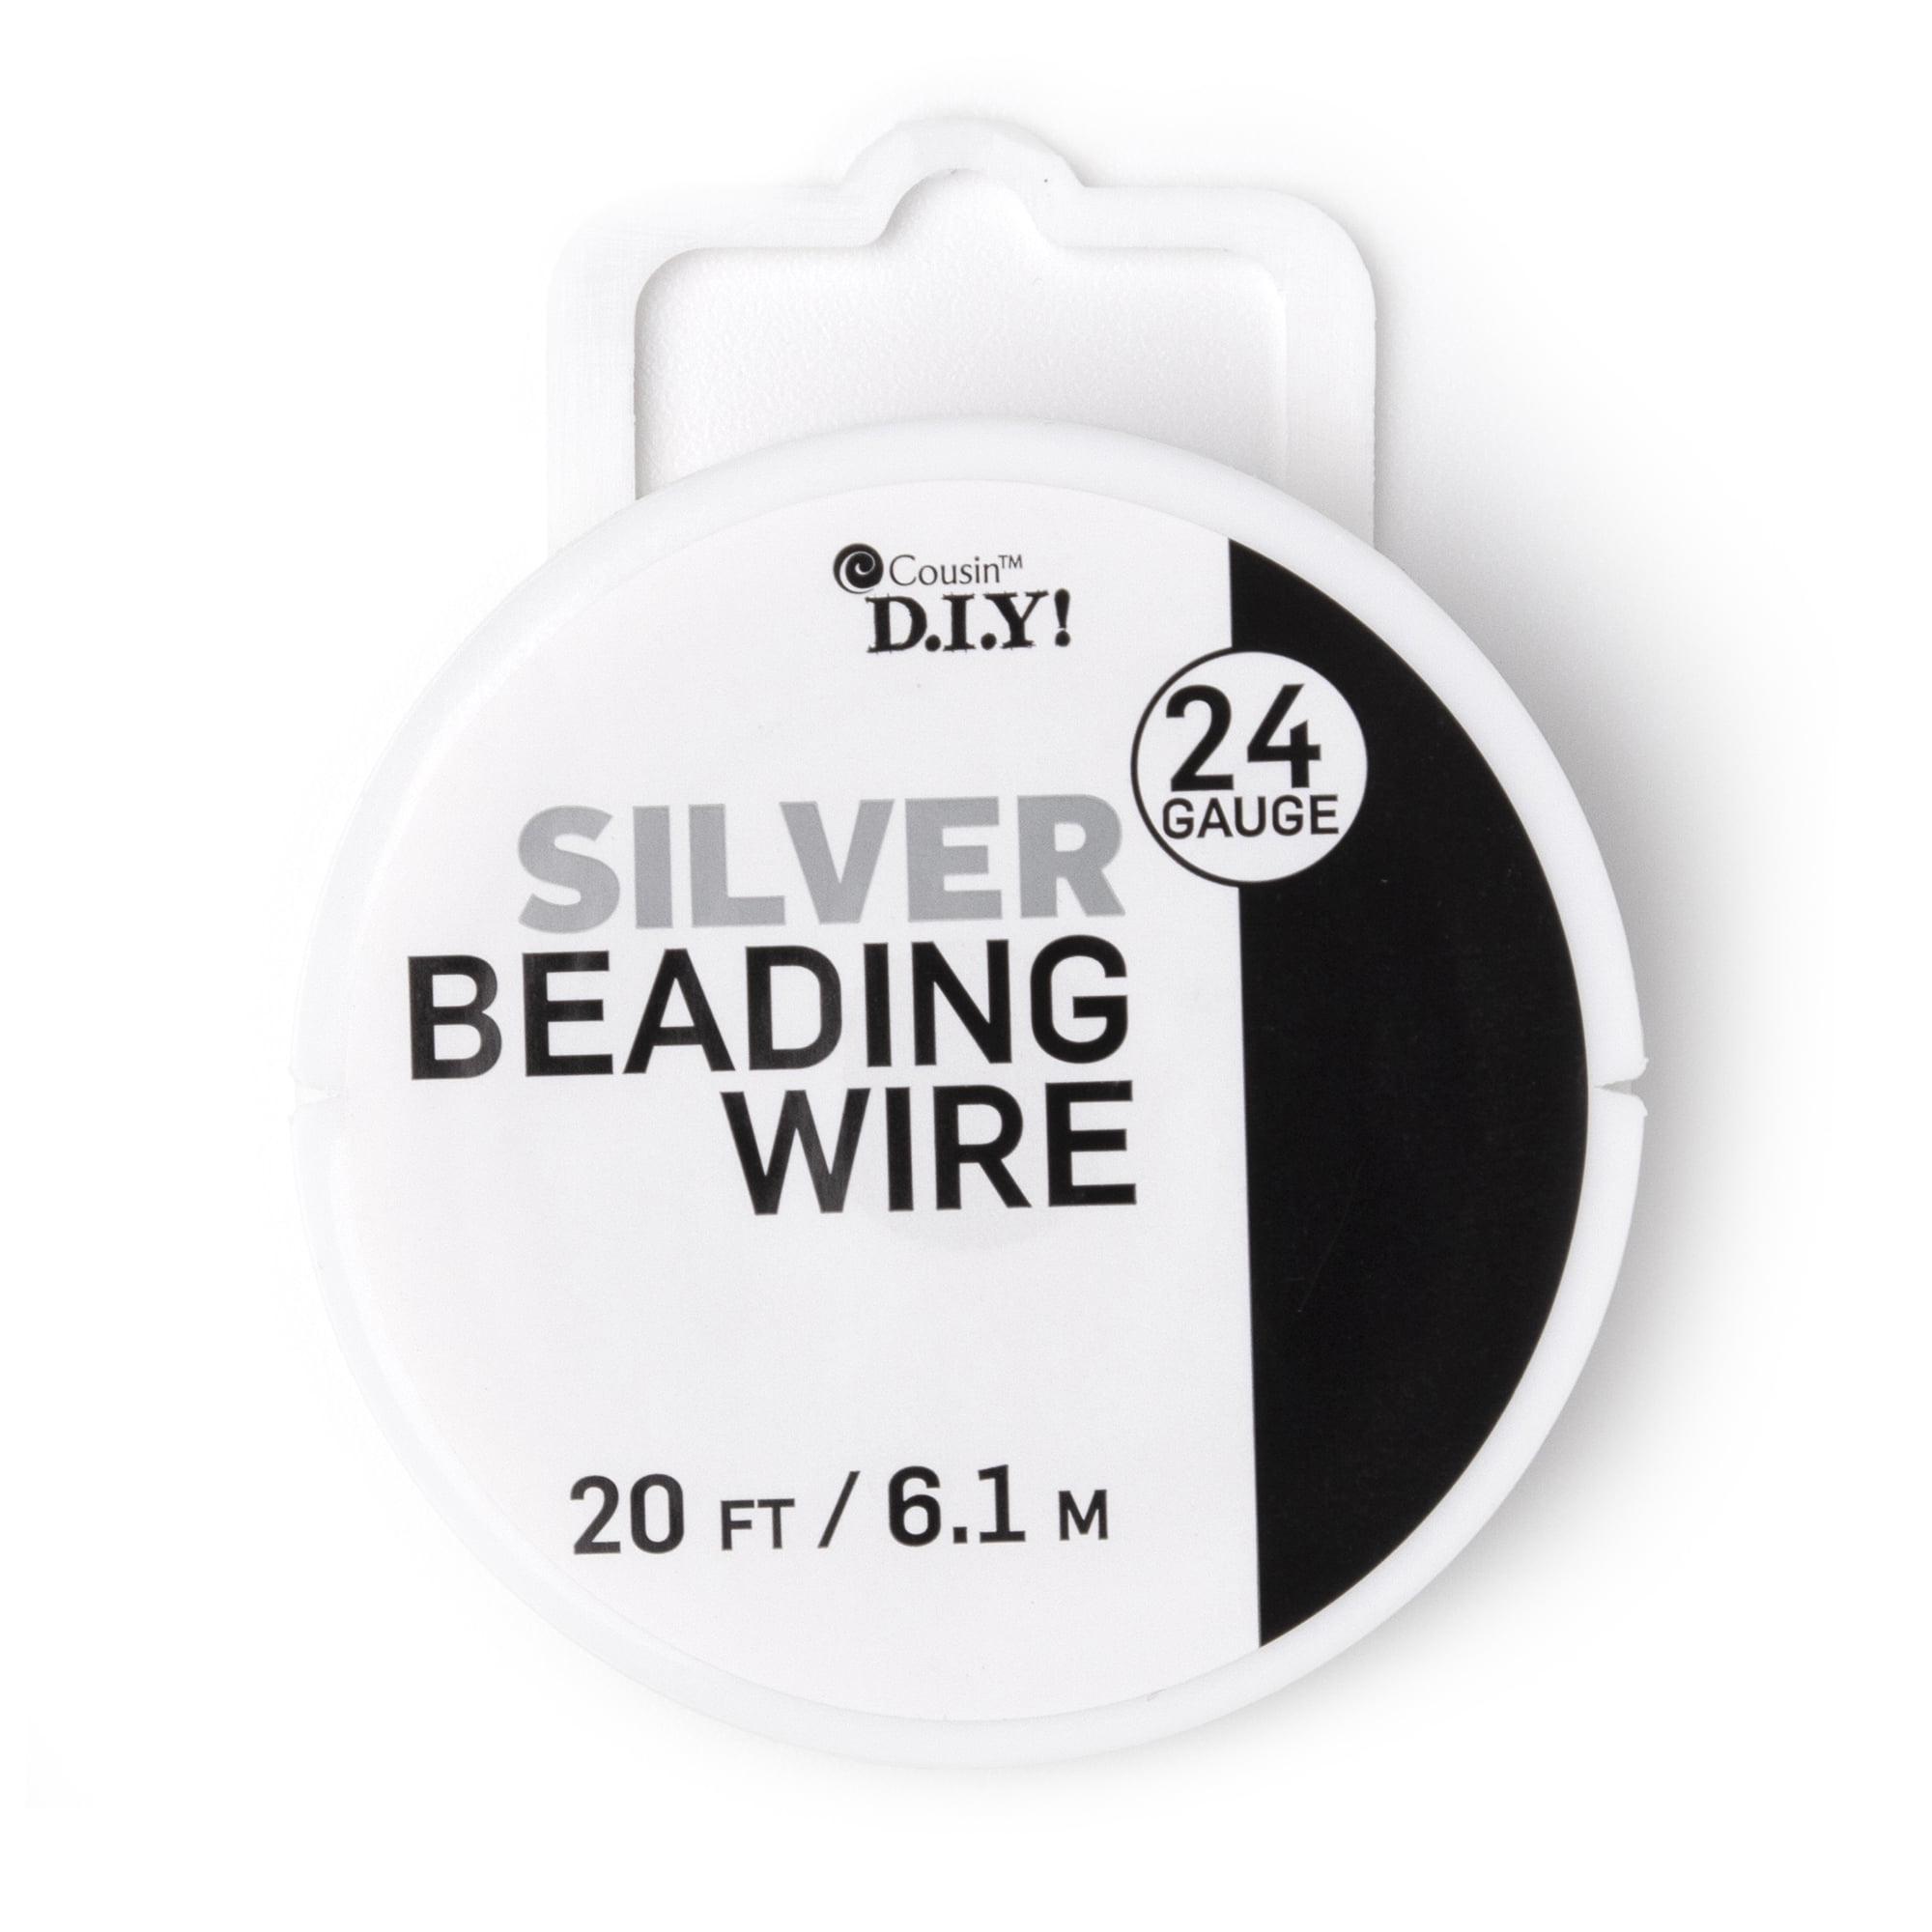 Beading wire - Cousin DIY